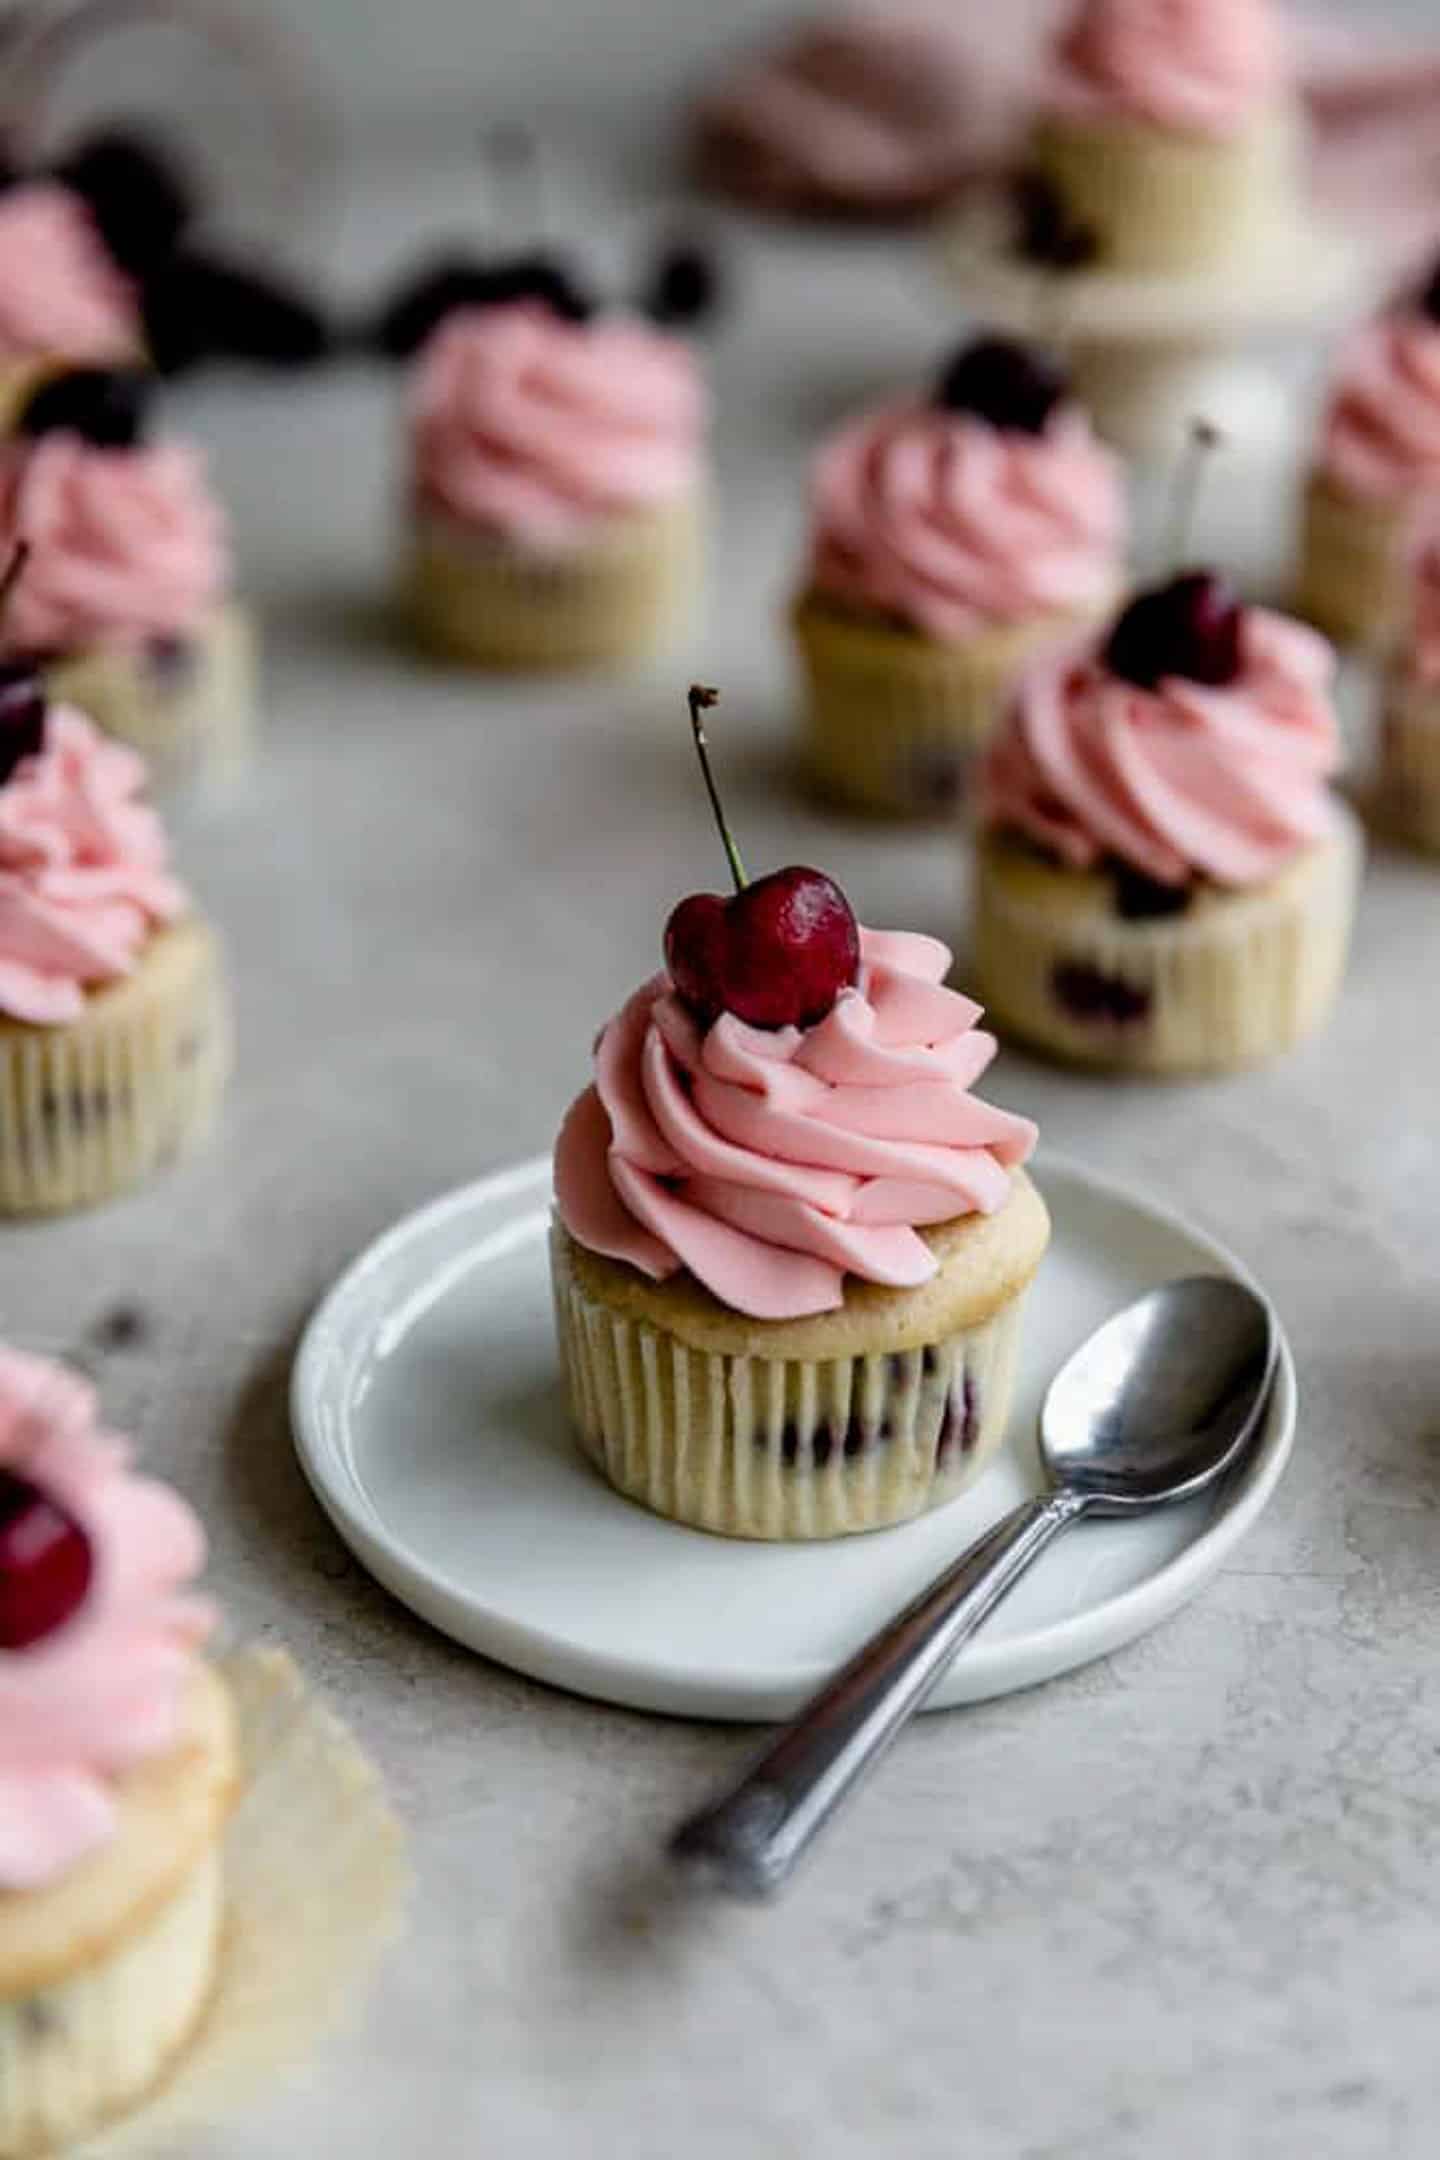 A cherry cupcake with cherry frosting on a white plate garnished with a fresh cherry.